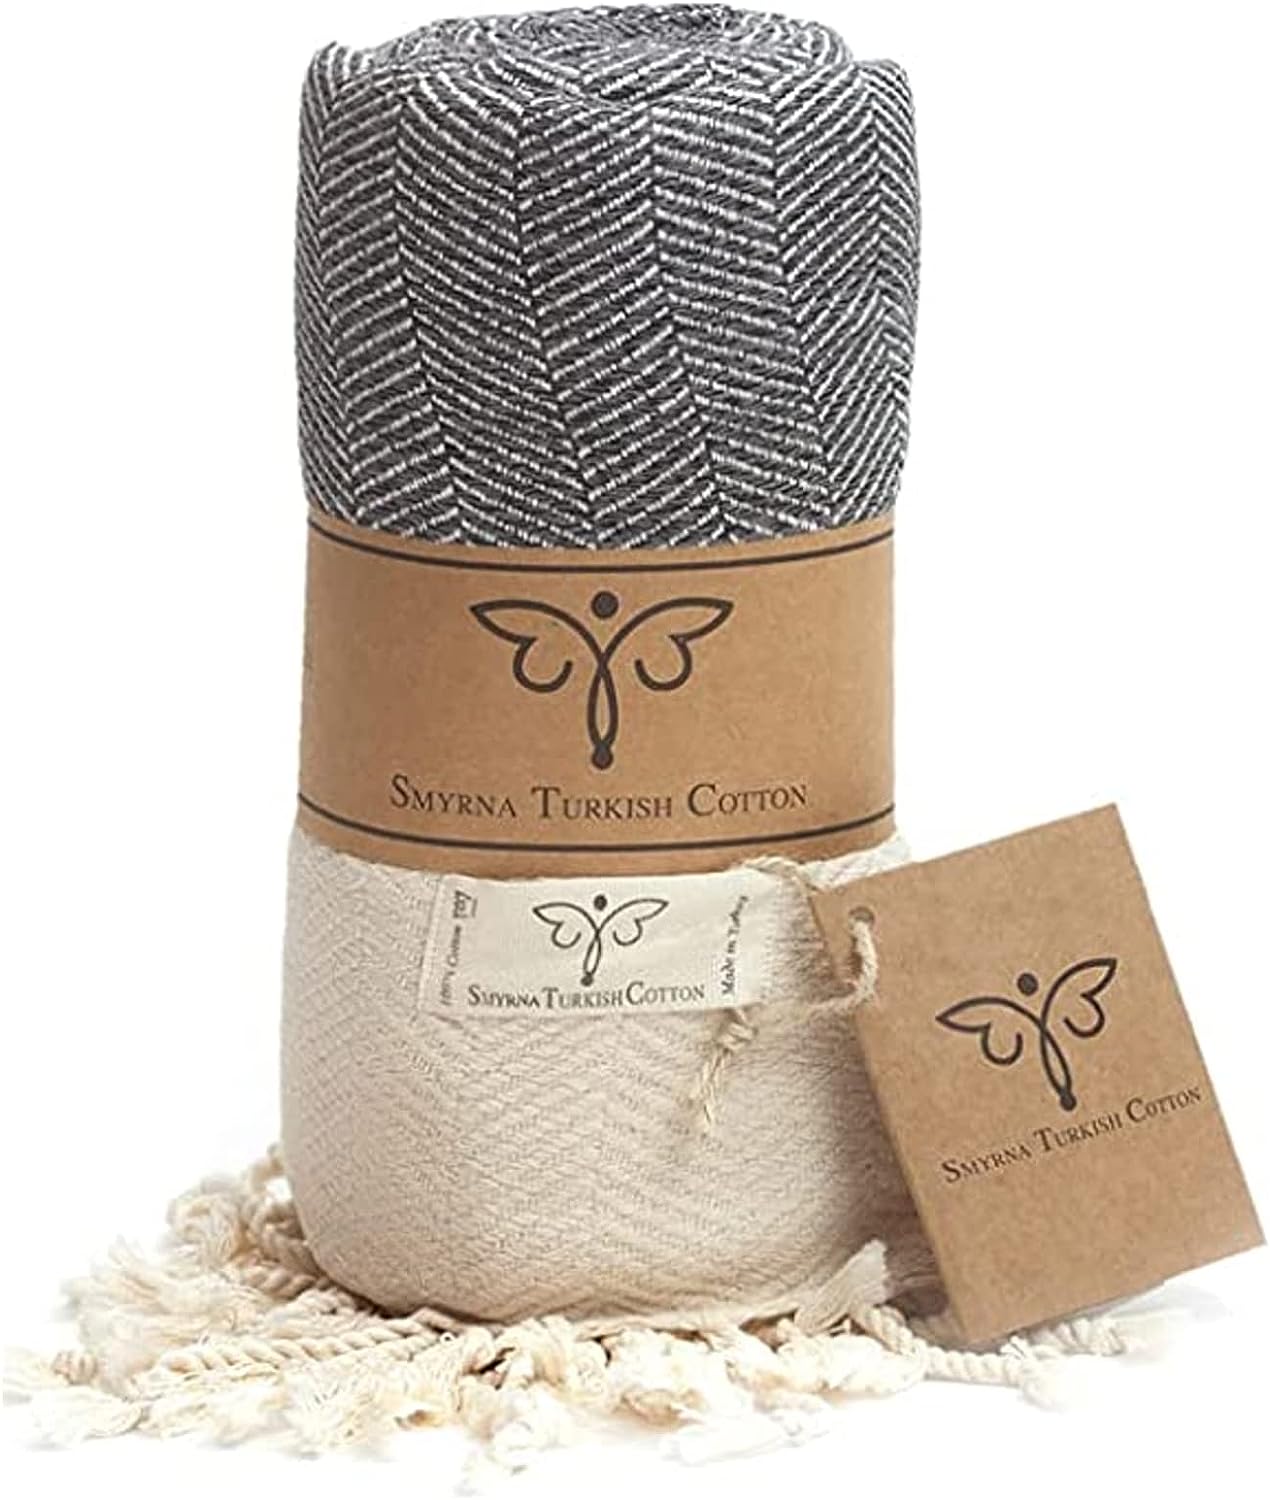 Smyrna Turkish Cotton Herringbone Series Table Runner 100% Cotton|Rectangular Table Cover & Protective Table Cloth|Made in Turkey|Doesn't Shrink| Premium Luxury (Dark Gray, 38 x 182 cm) 7